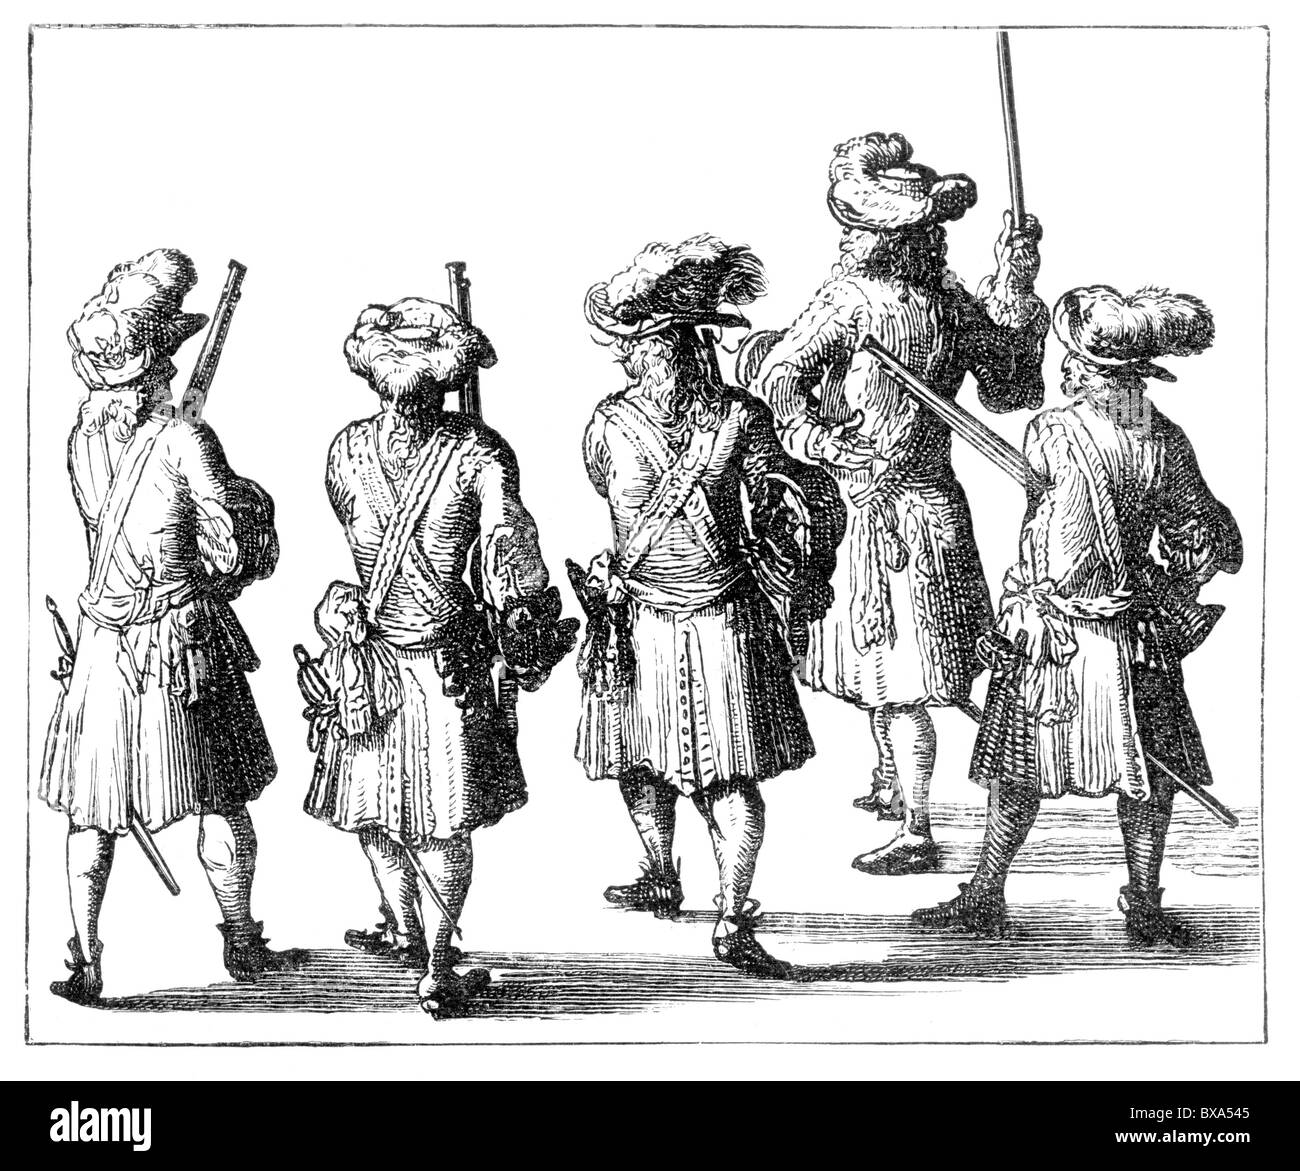 Dutch Guards; War of the Spanish Succession; Black and White Illustration; Stock Photo